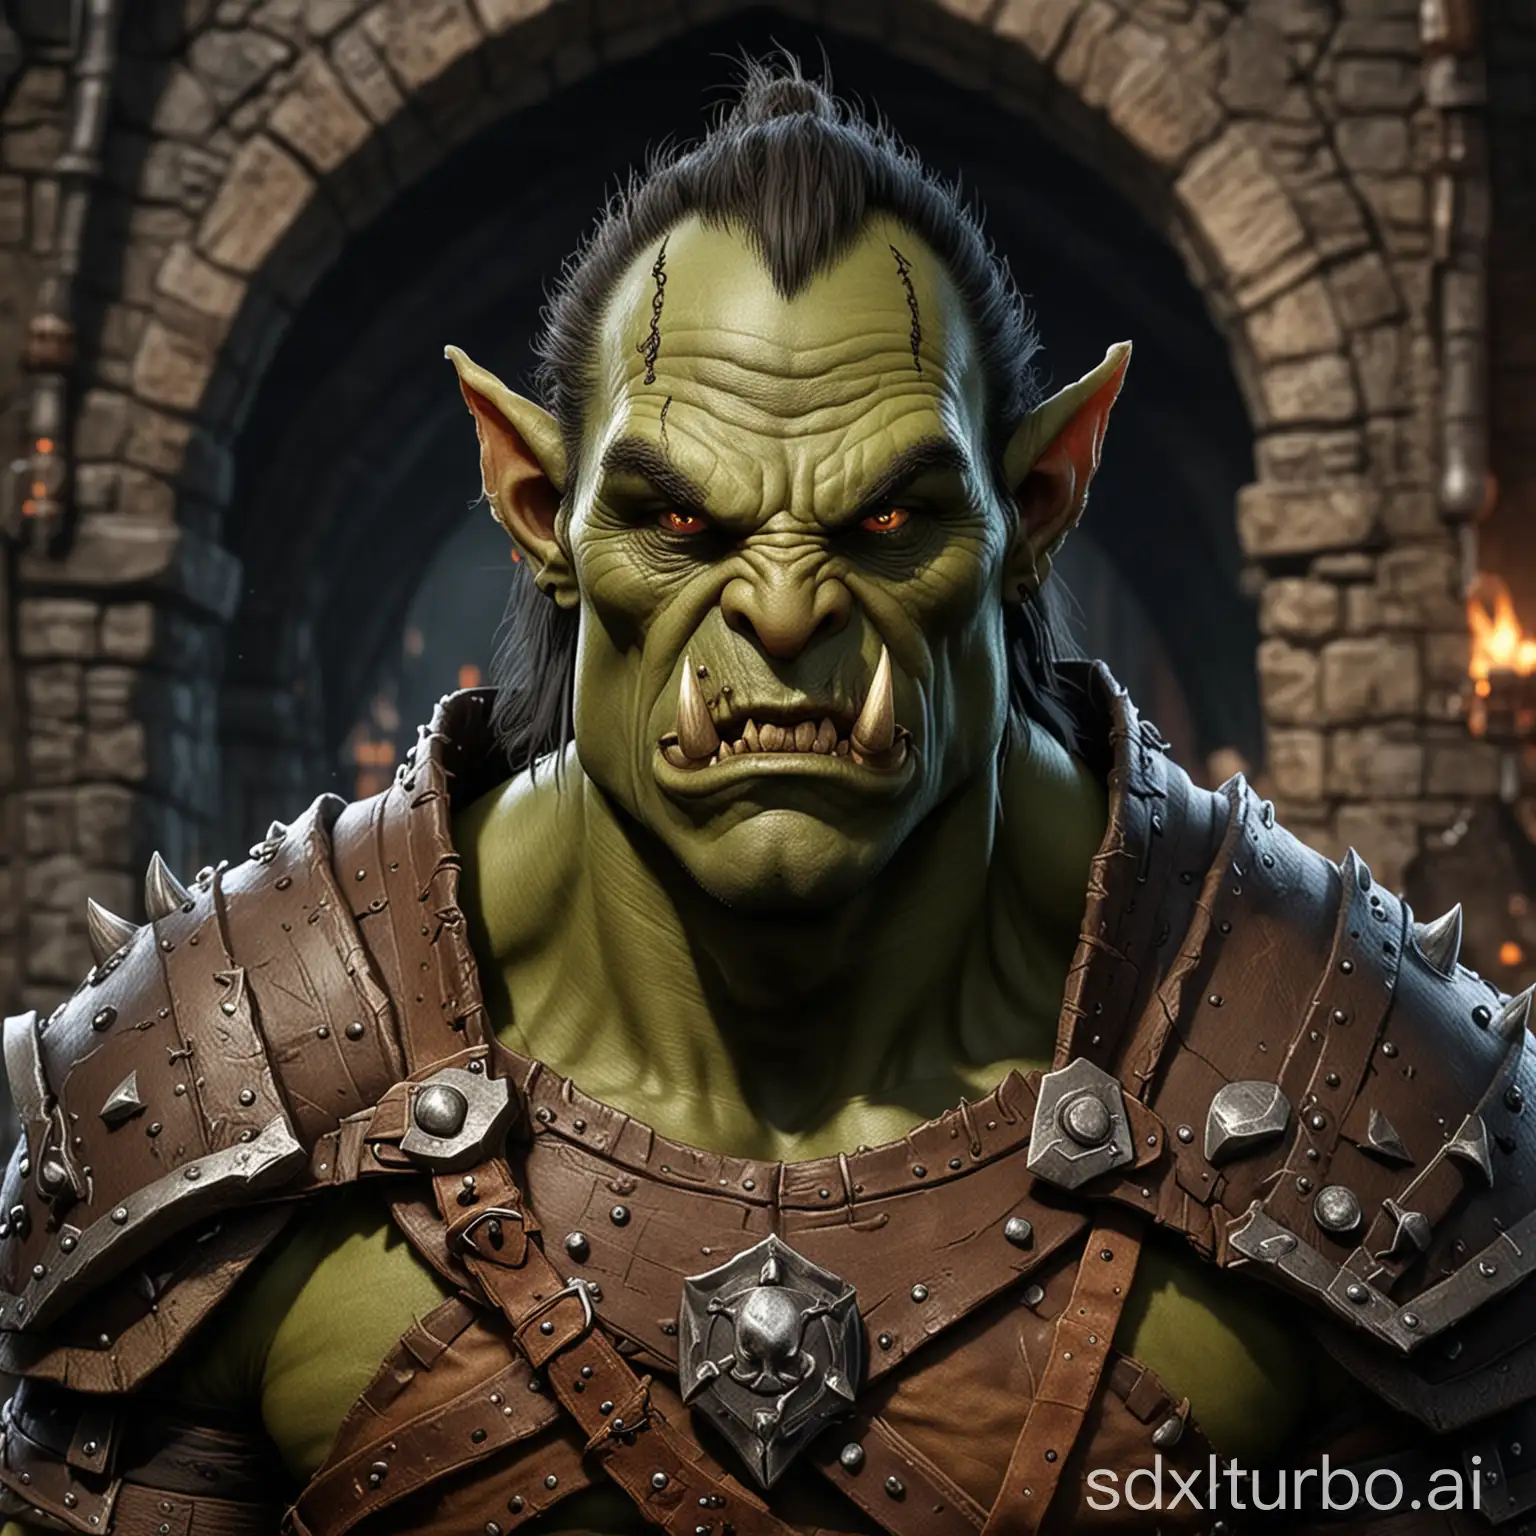 Avatar of an orc in Dungeon and Dragons style